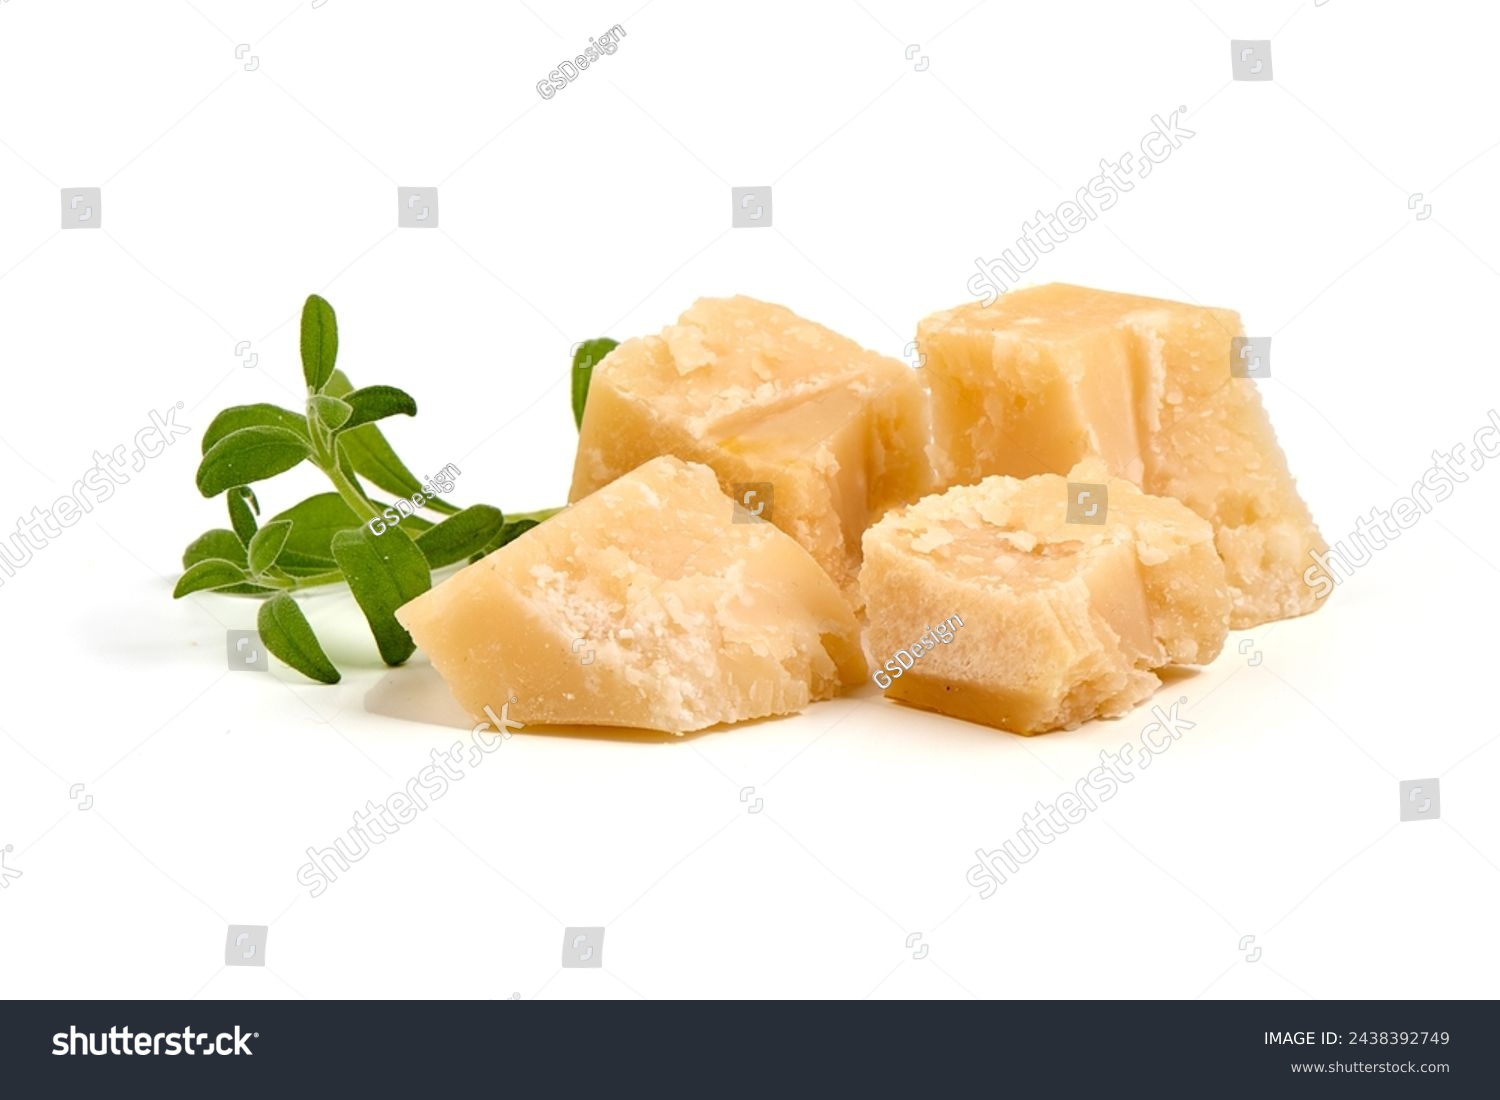 Parmesan cheese chunks, hard cheese, isolated on white background #2438392749